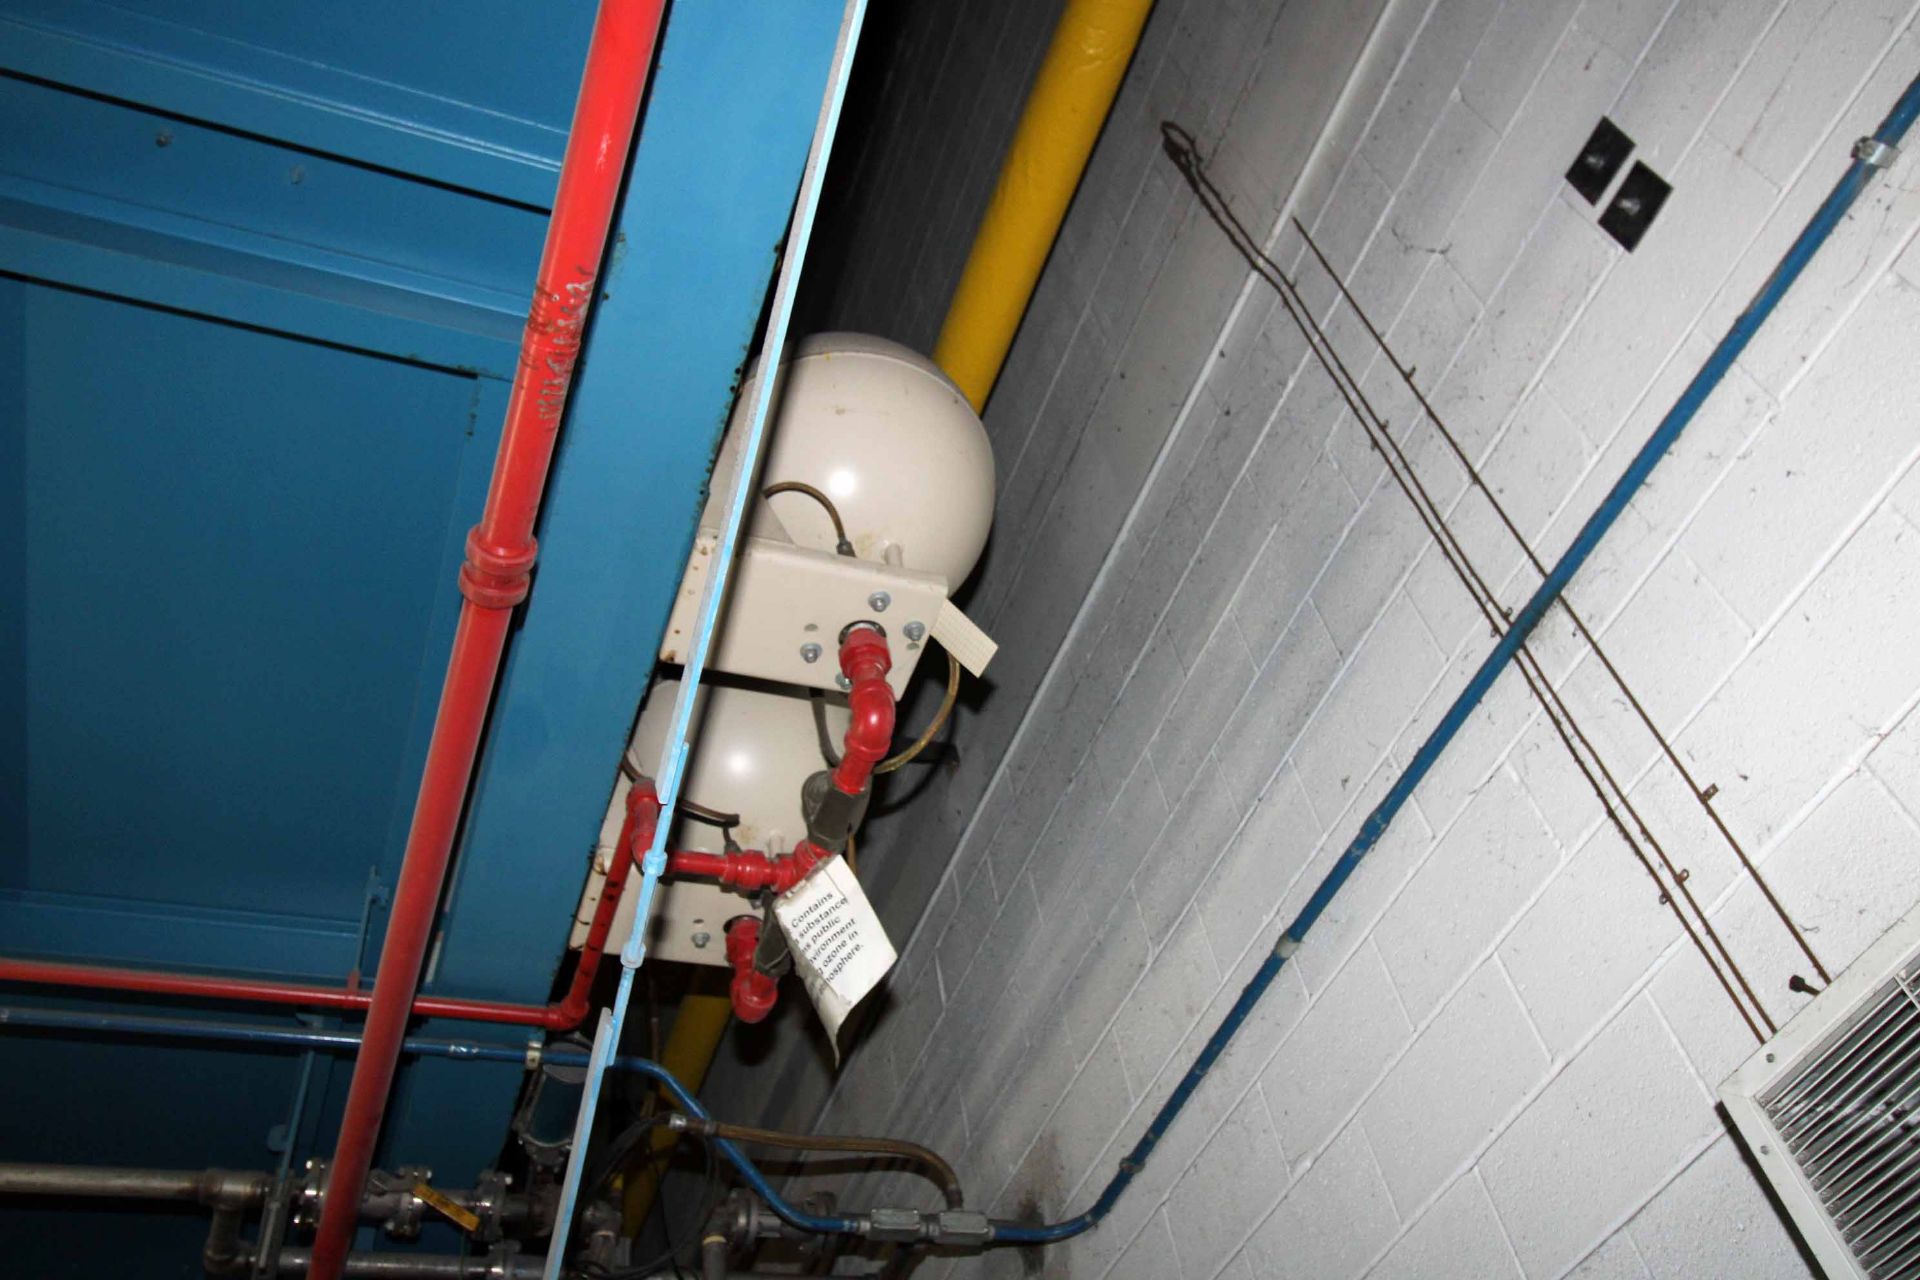 FIRE SUPPRESSION SYSTEM, HALON, (16) spherical storage tanks & control system. - Image 3 of 4